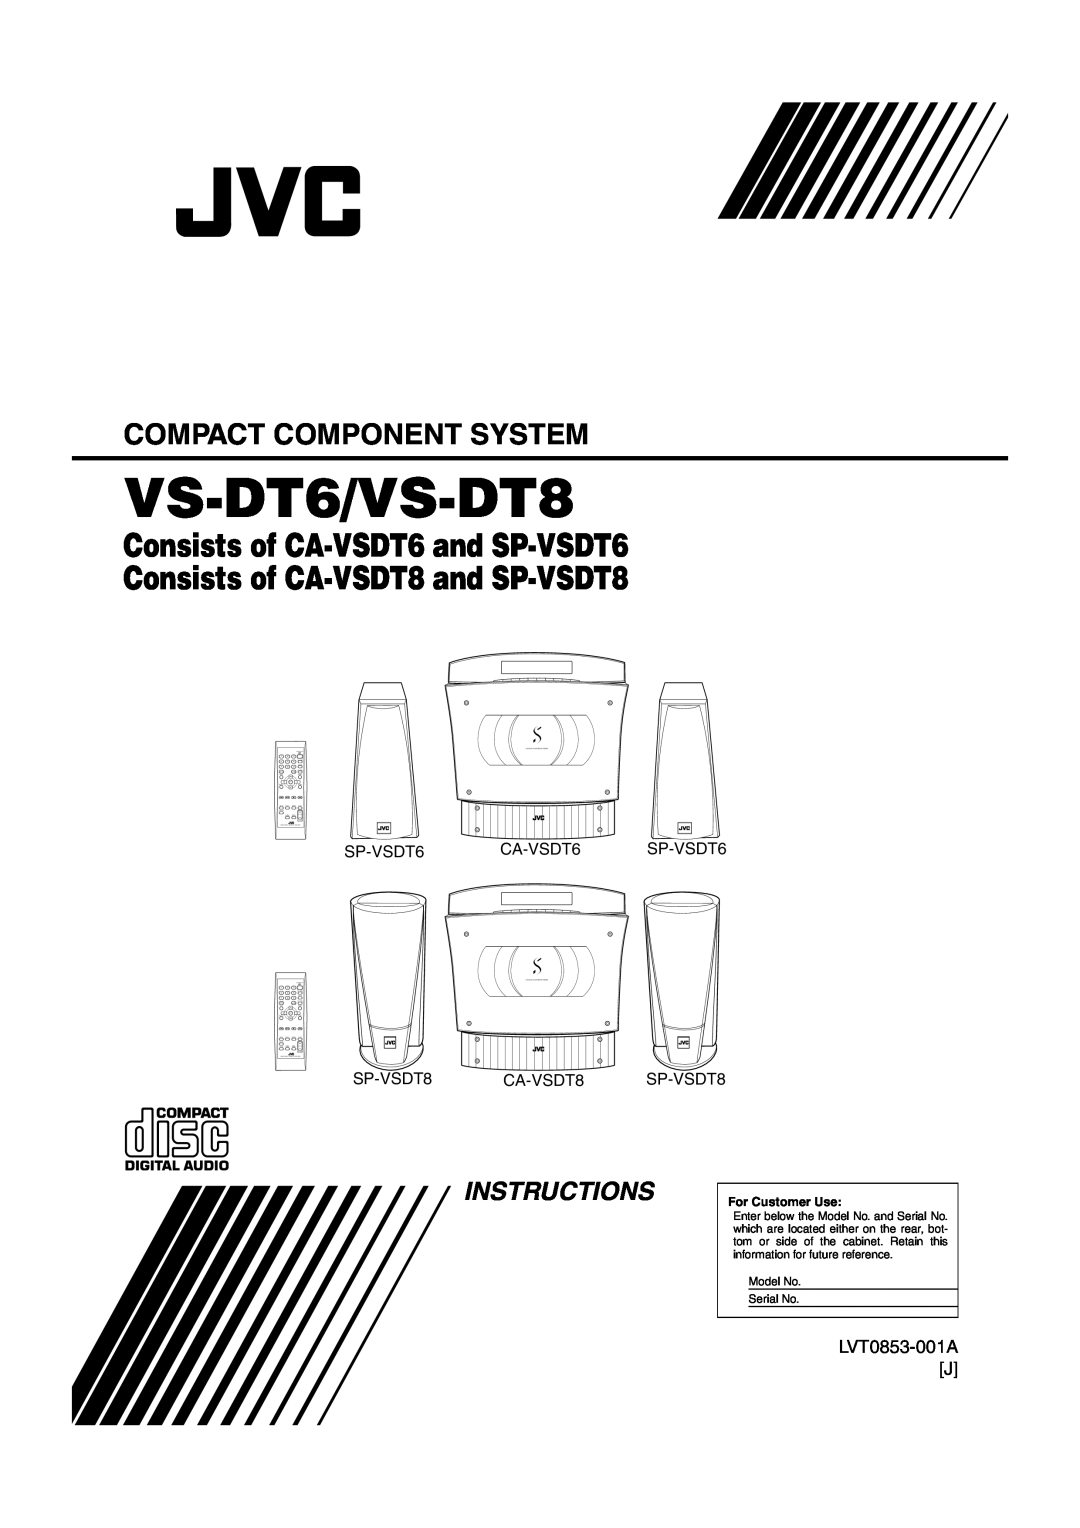 JVC VS-DT6/VS-DT8 manual Consists of CA-VSDT6and SP-VSDT6, Consists of CA-VSDT8and SP-VSDT8, Compact Component System 